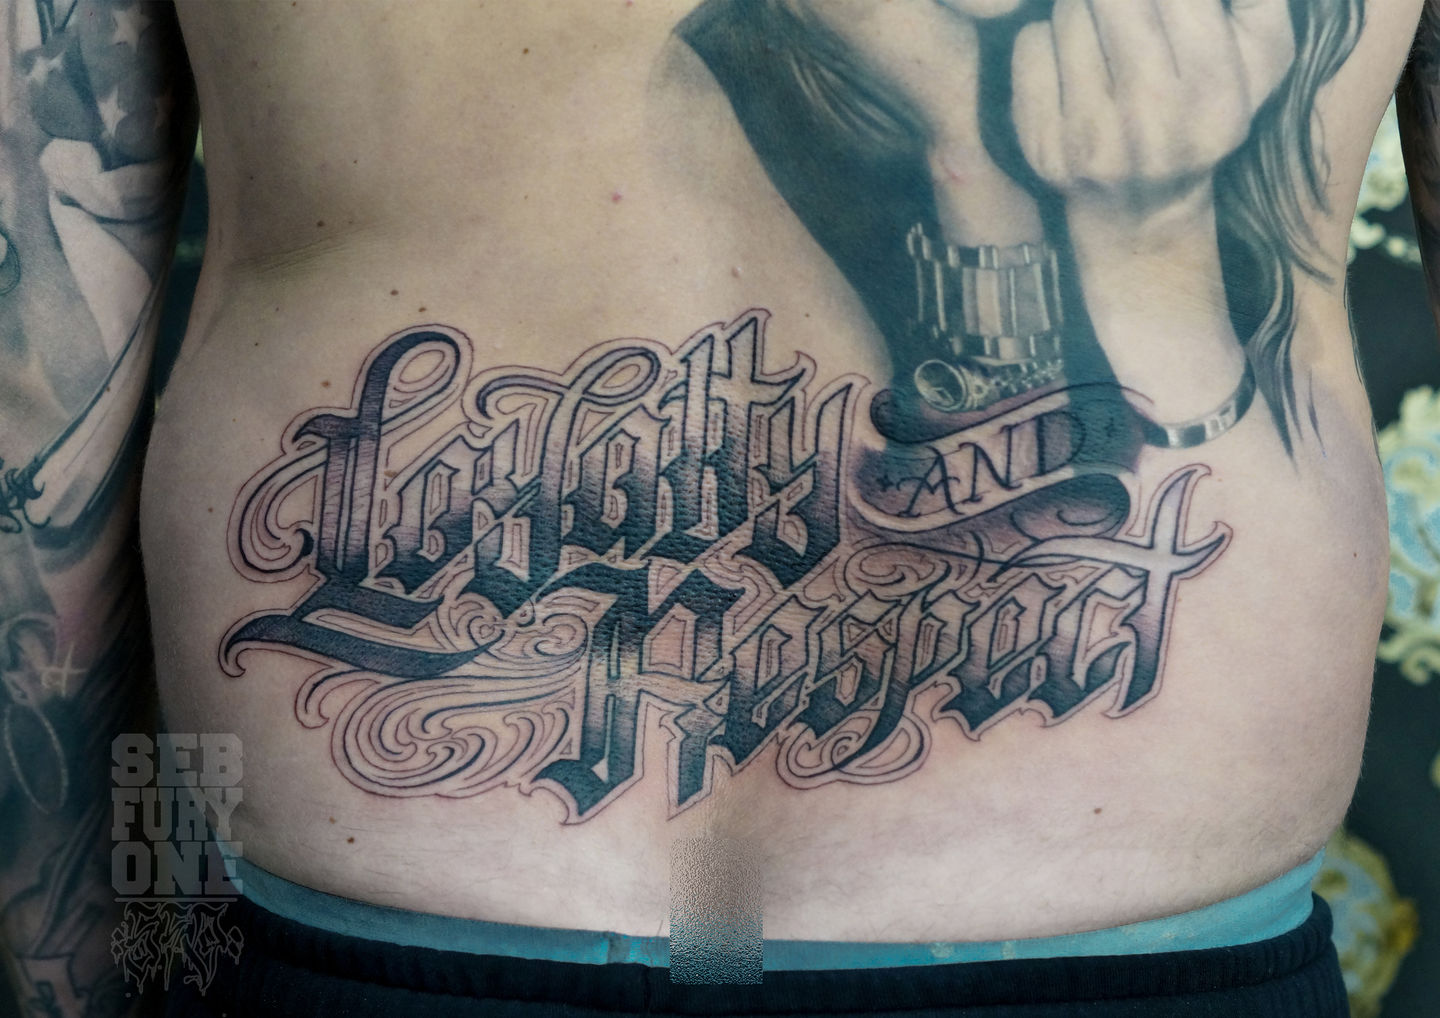 Some nice script from today loyalty over everything #tattoo #script #tattoos  #scripttattoo #lettering #letters #tattooart #tattooartist ... | Instagram